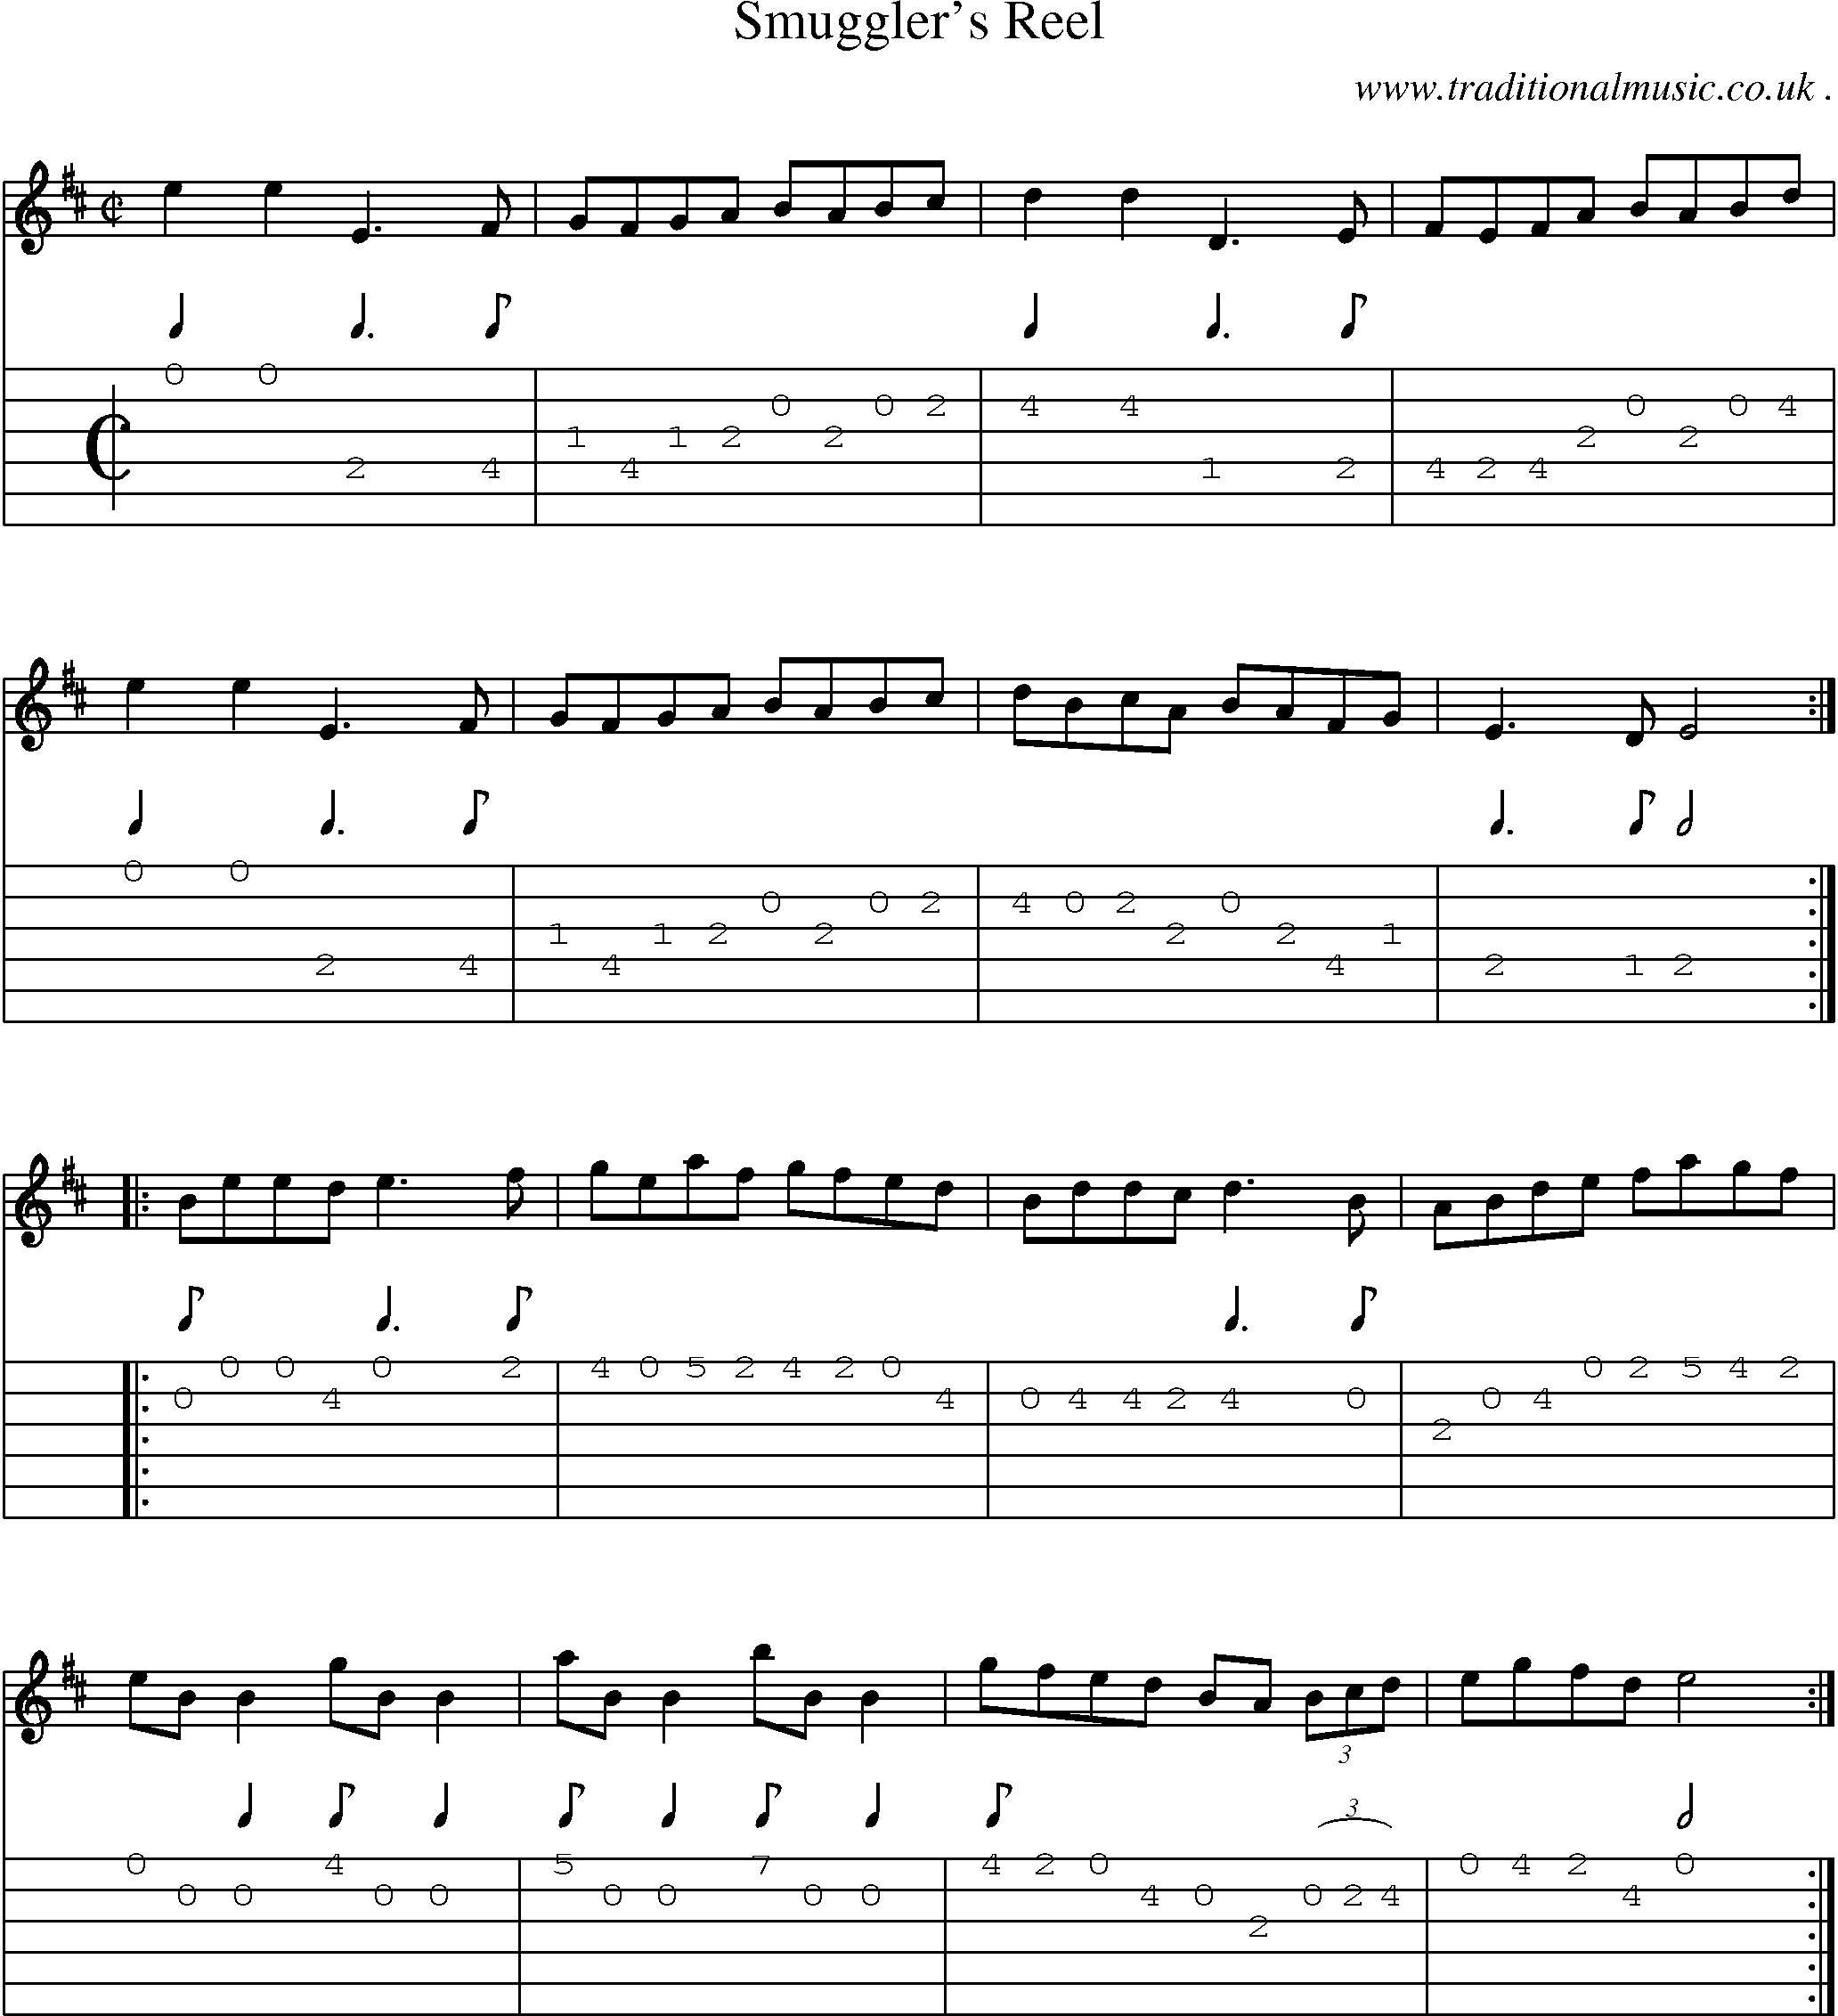 Sheet-Music and Guitar Tabs for Smugglers Reel